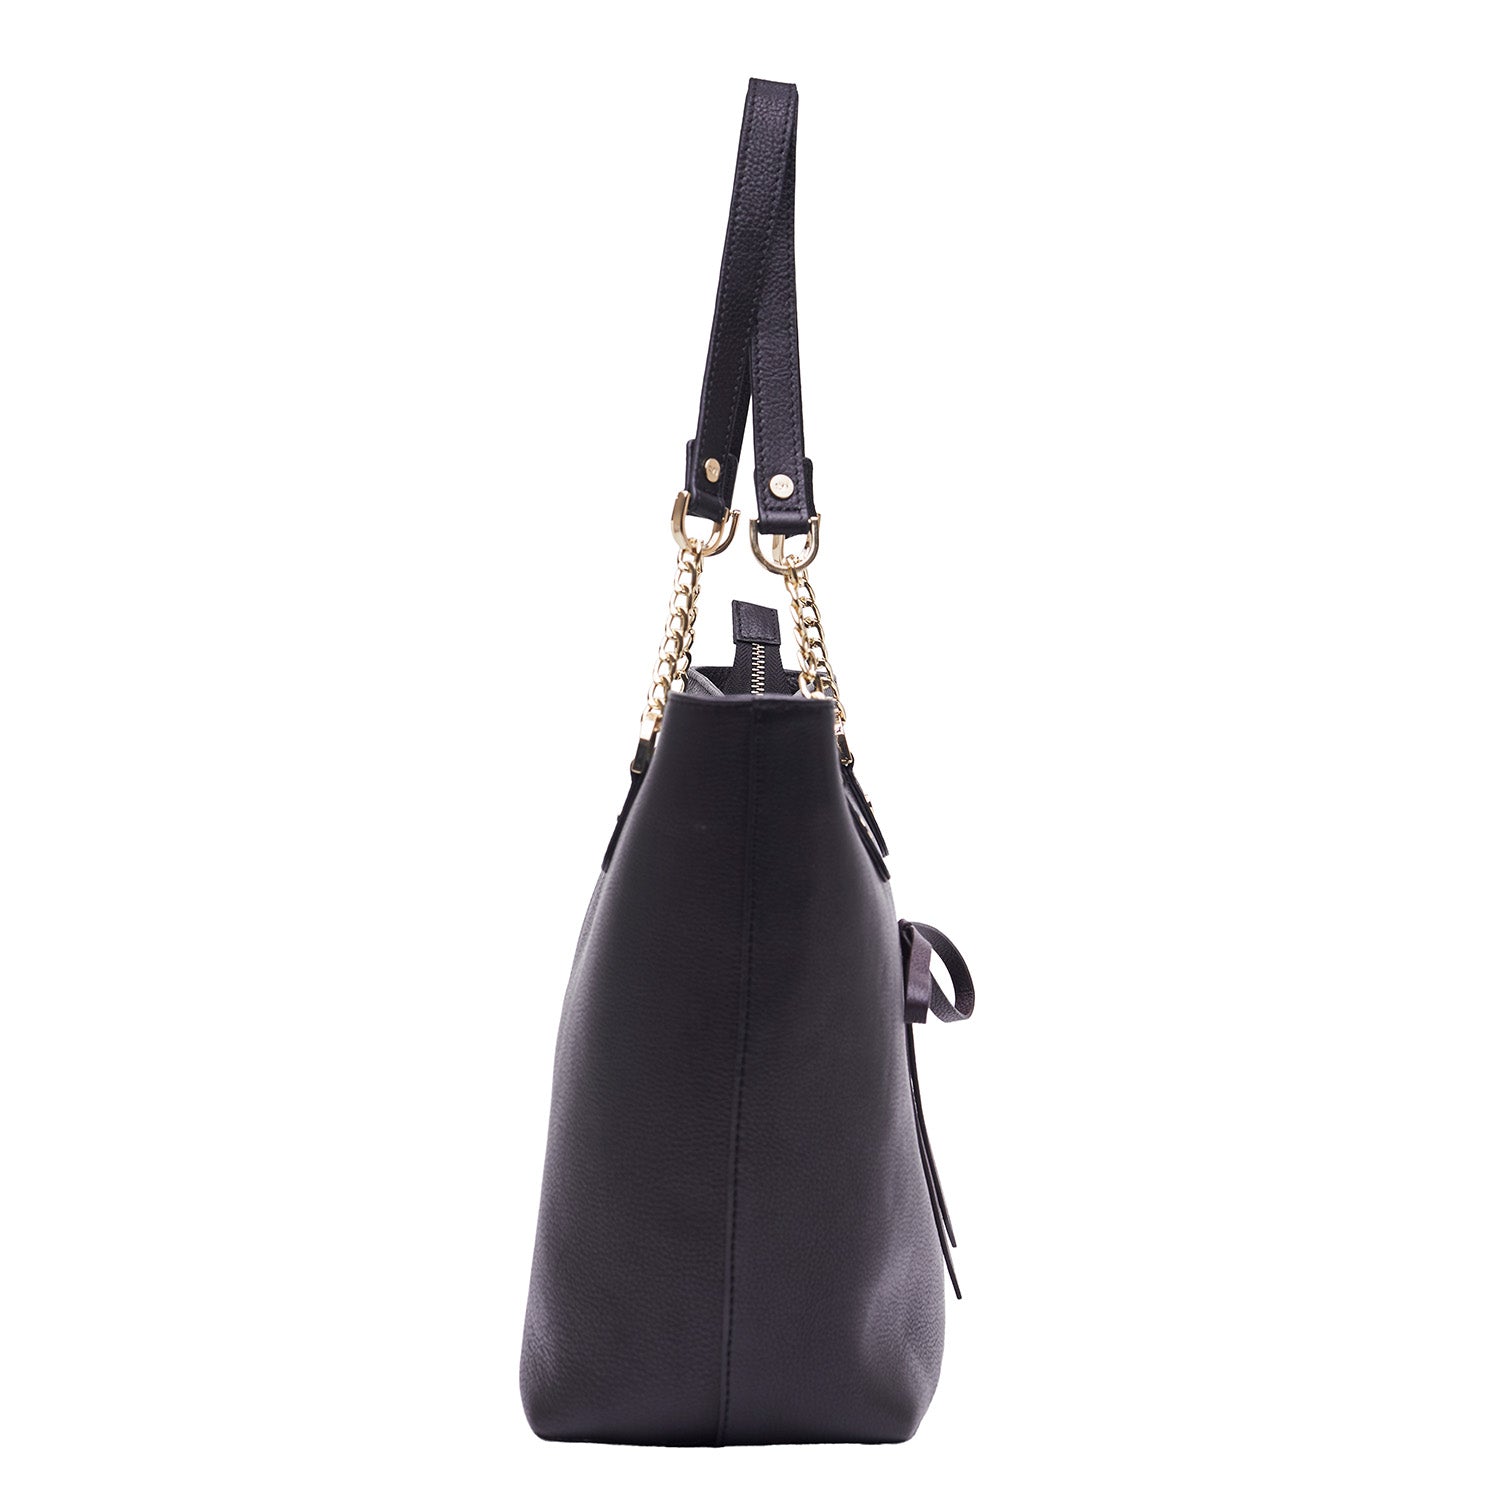 Women's Totes & Bucket Bags - tohl